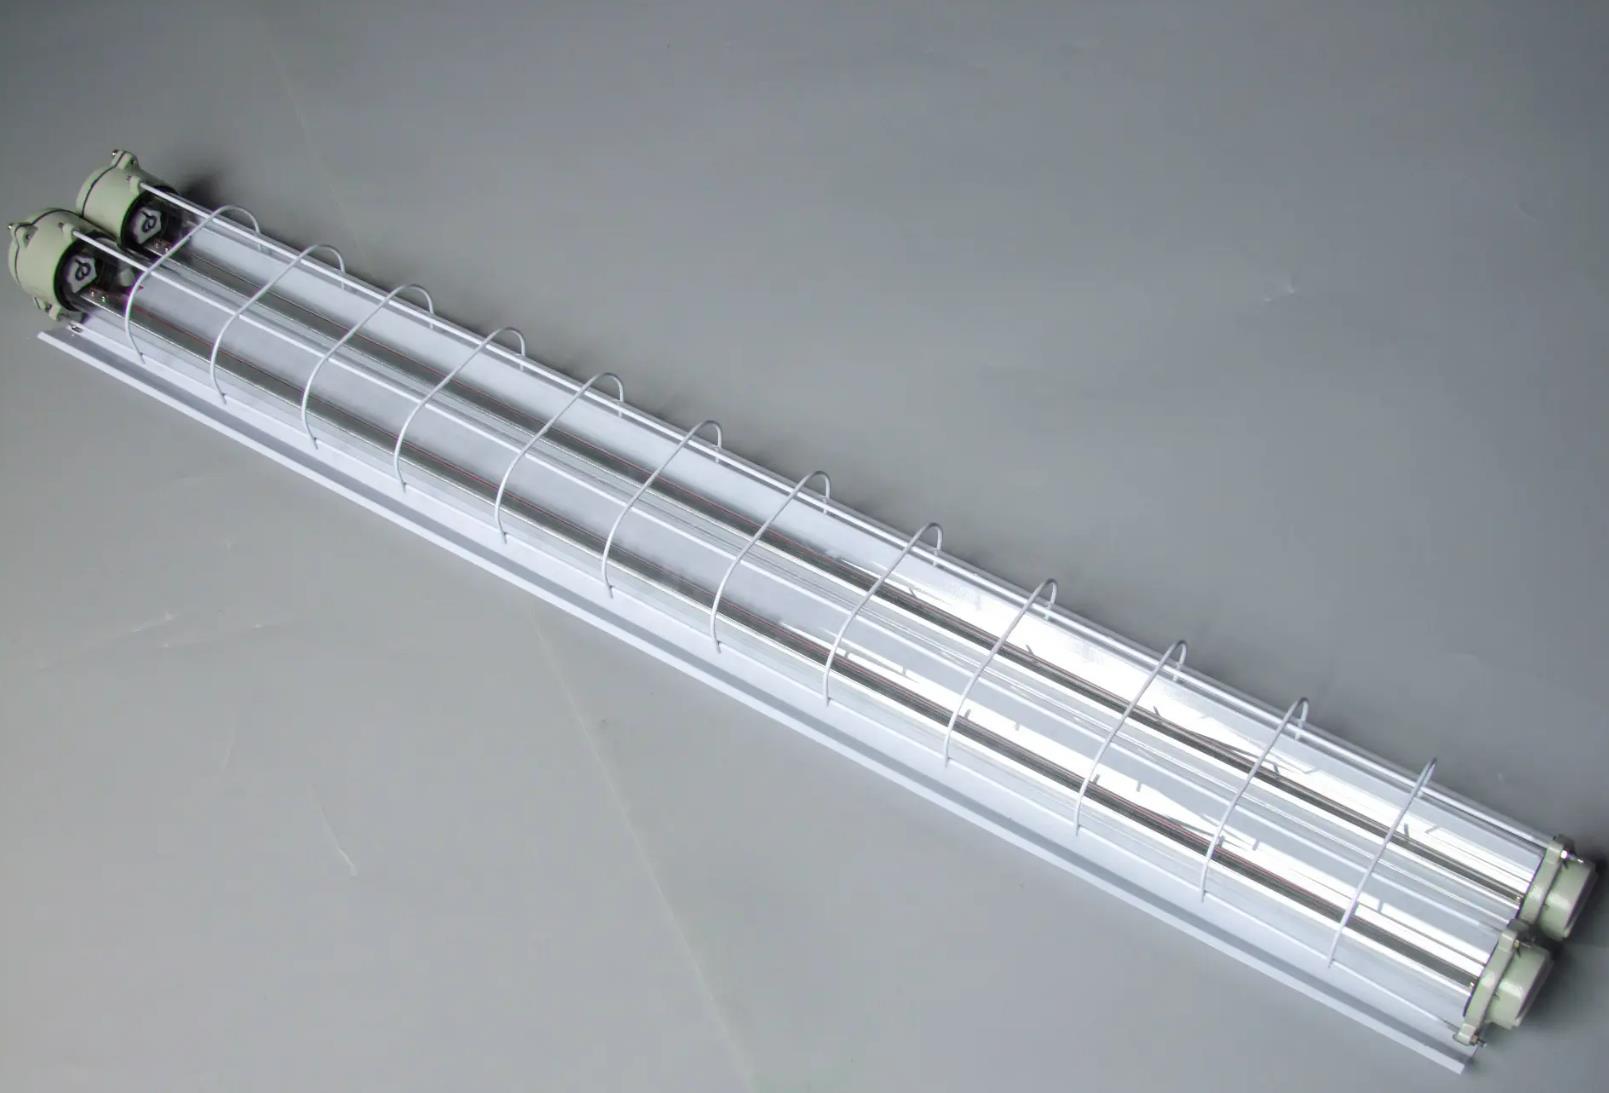 LED explosion-proof tube features